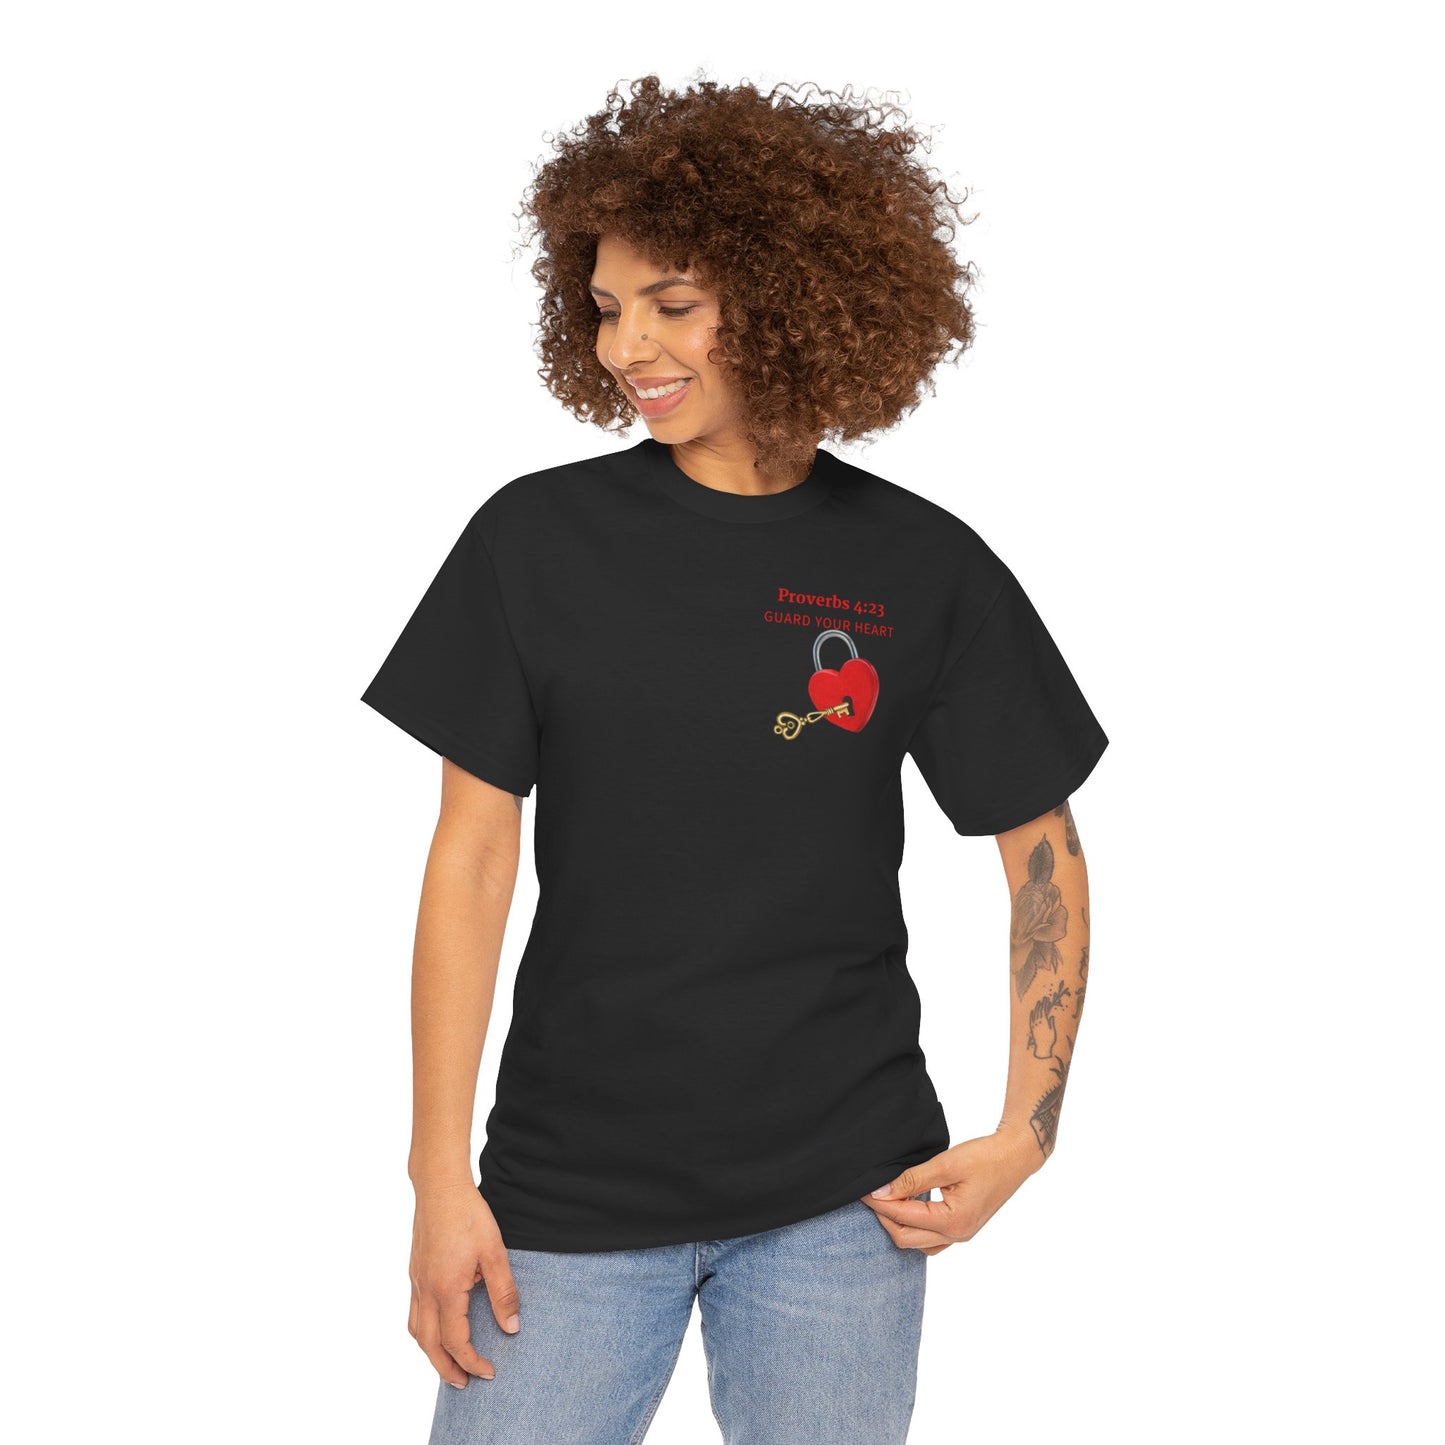 Guard your Heart Daily with Diligence * Proverbs 4:23 Inspirational Tee for Self-Care Enthusiasts